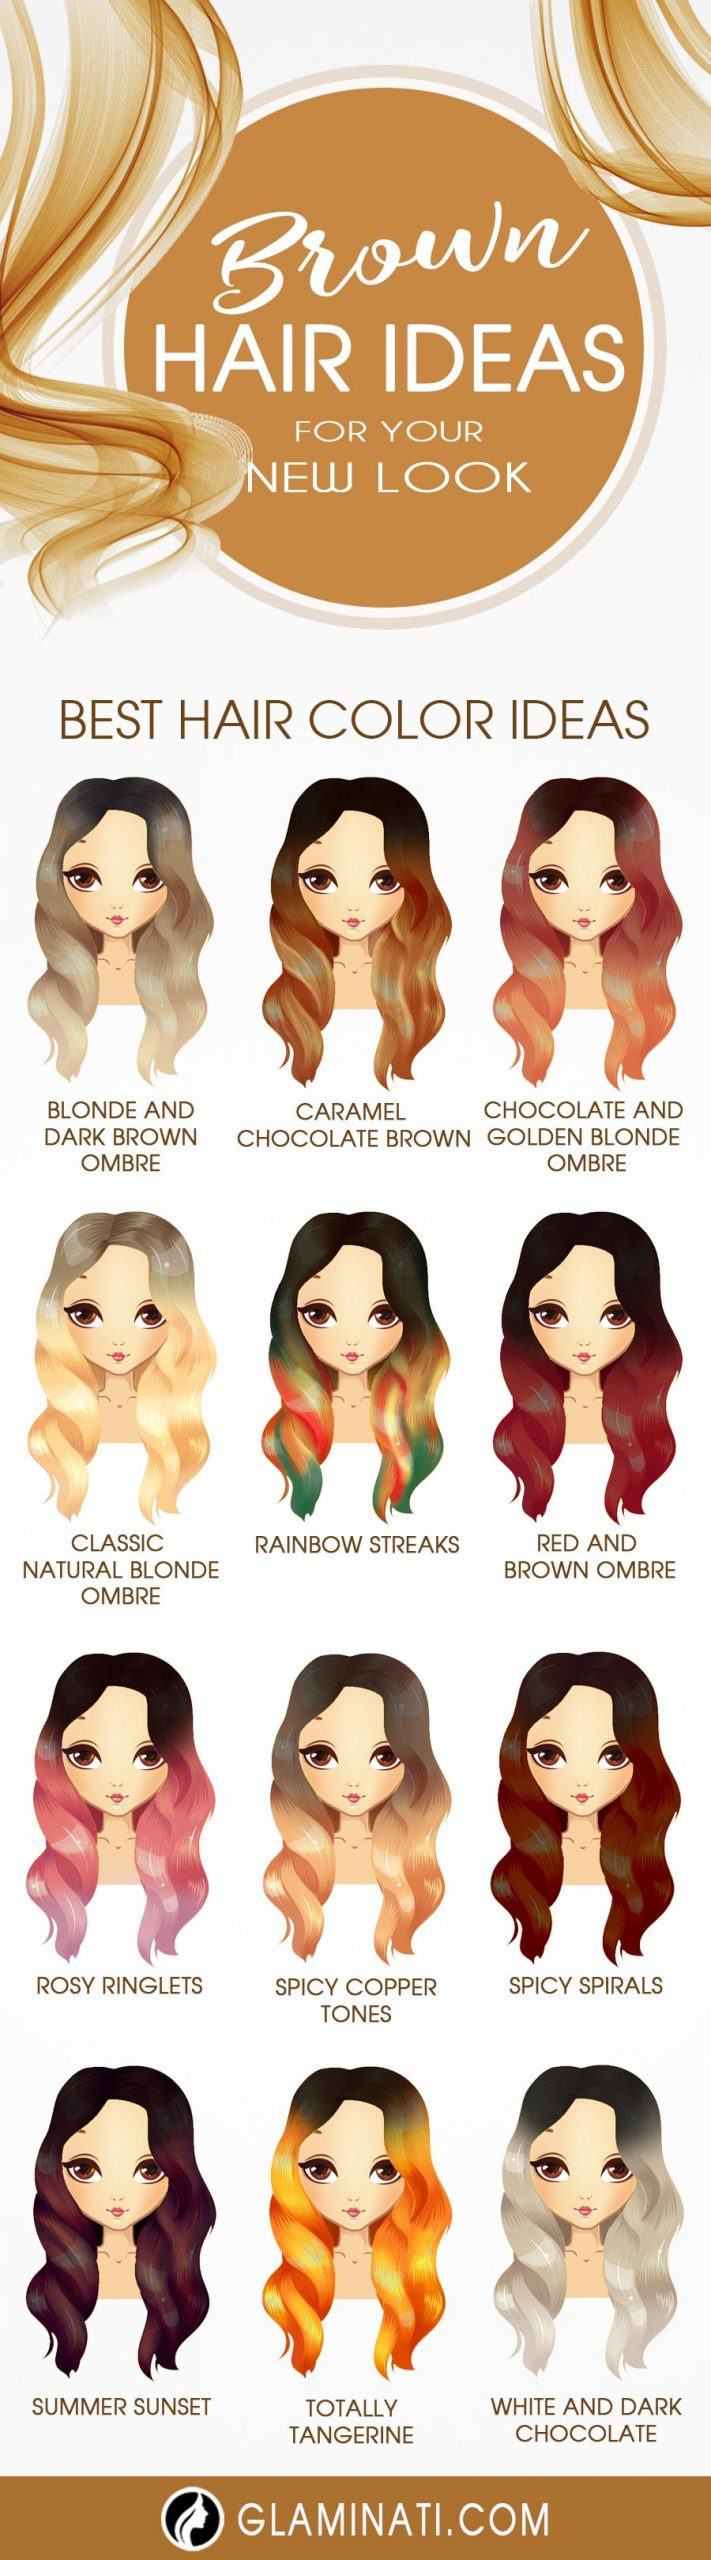 Charming and Chic Options for Brown Hair with Highlights